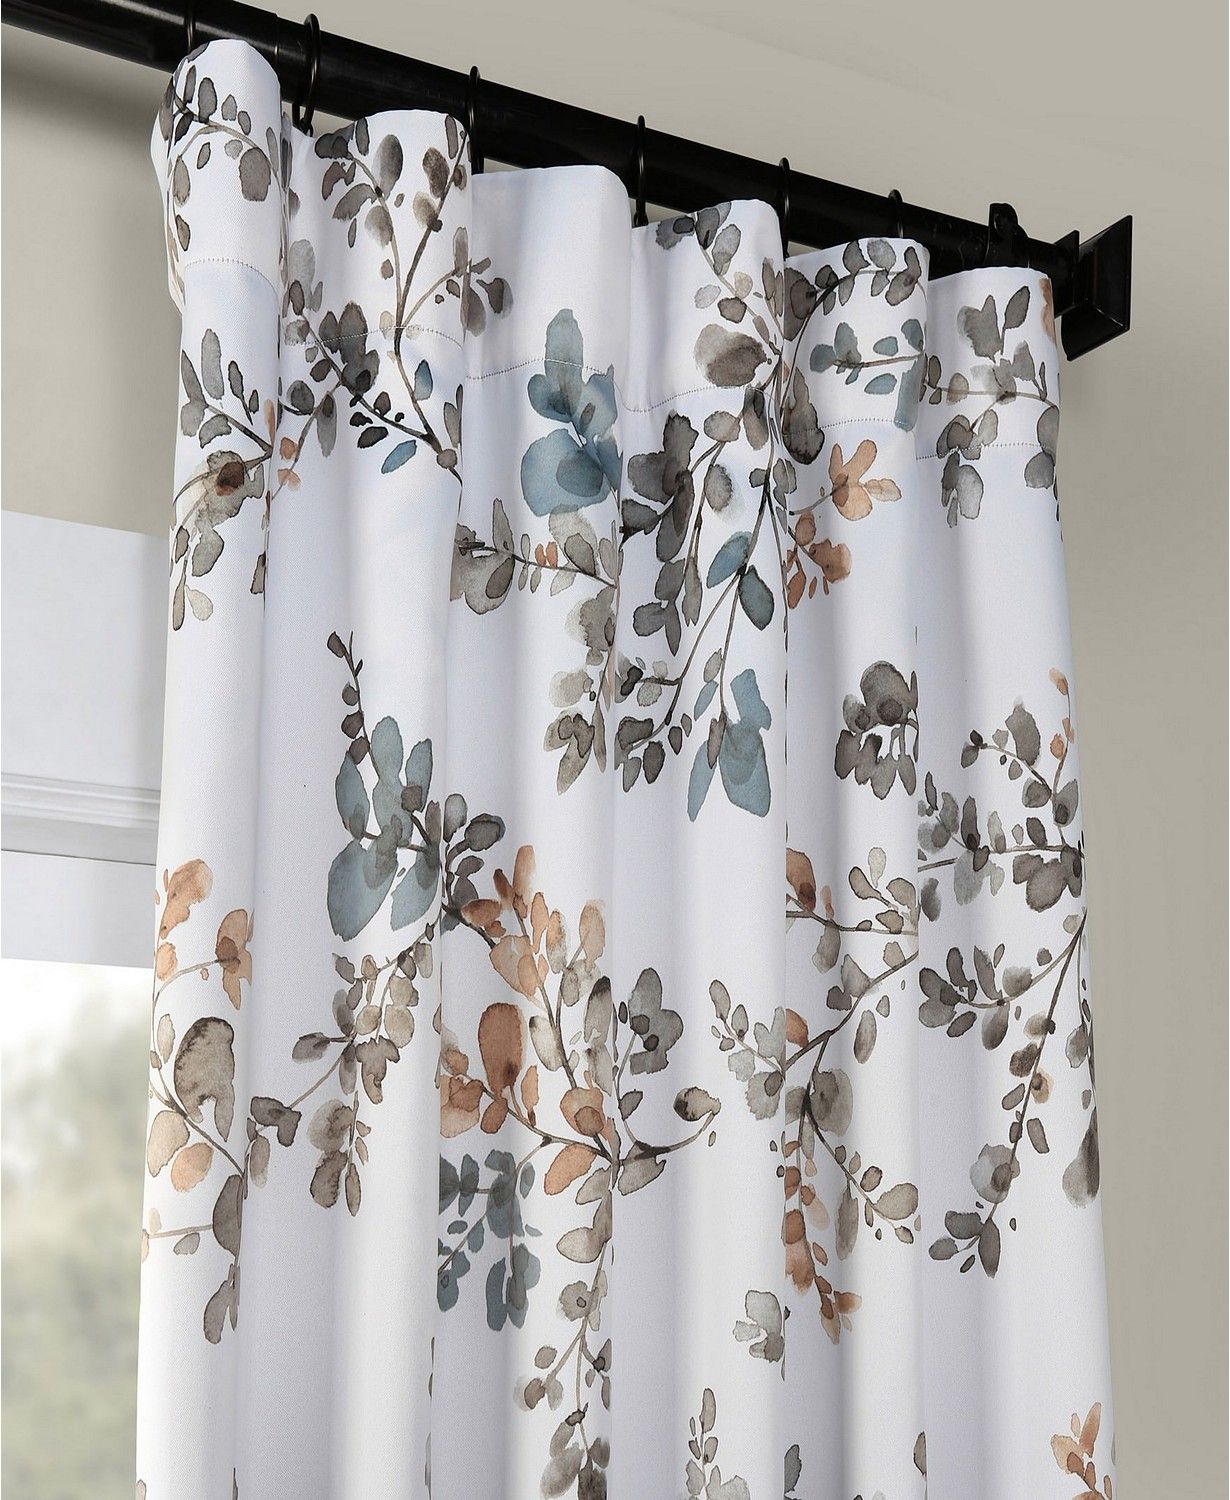 Installing Aesthetic Floral Curtains